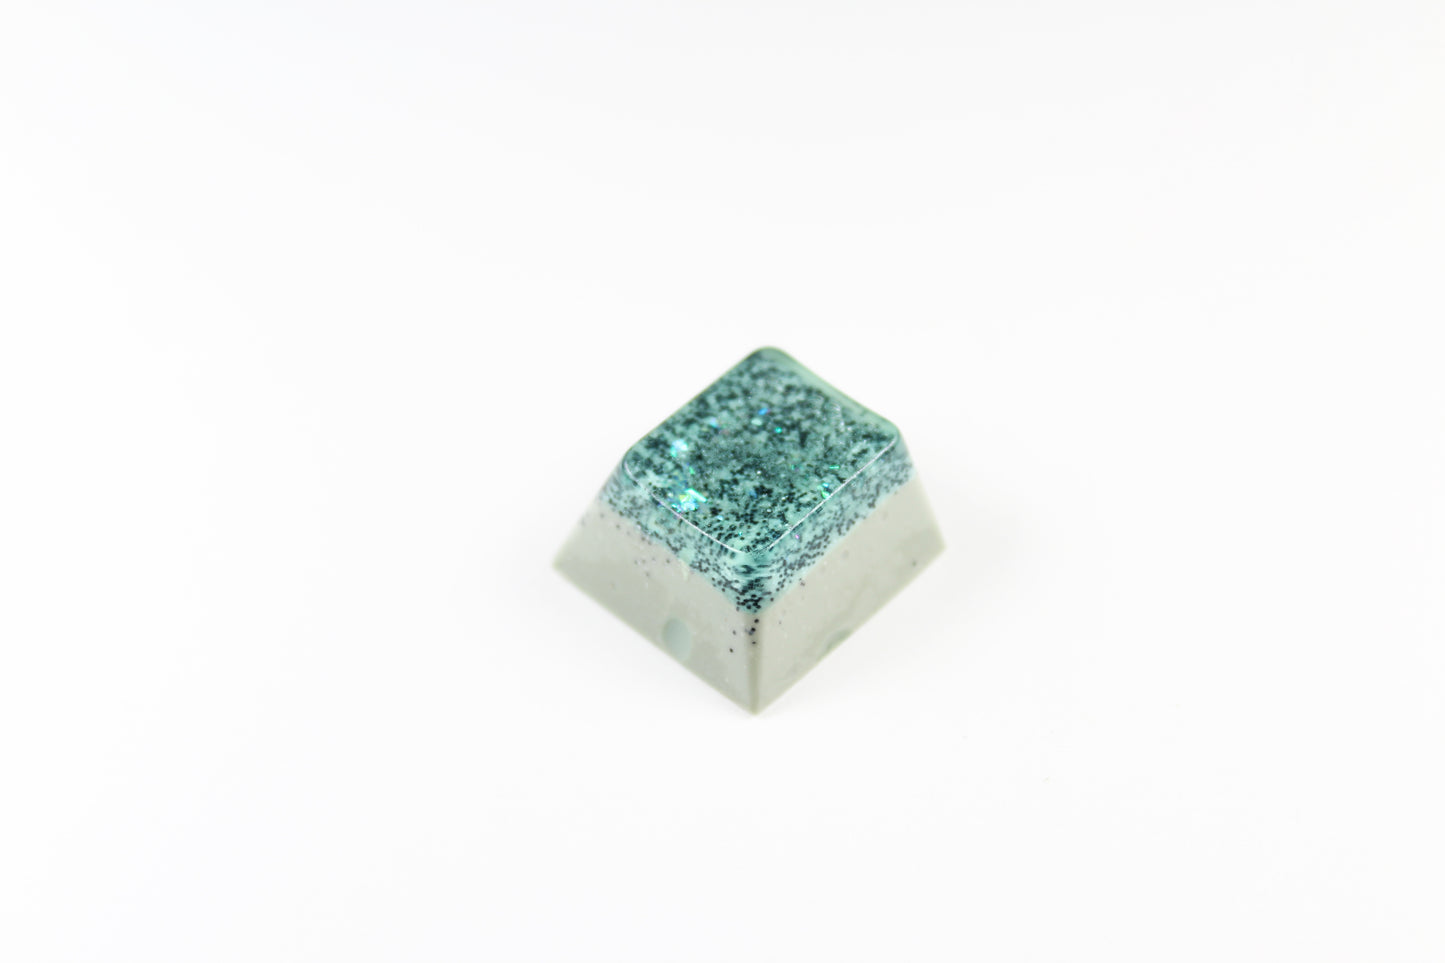 Cherry Esc - Anchor Point -1 - PrimeCaps Keycap - Blank and Sculpted Artisan Keycaps for cherry MX mechanical keyboards 